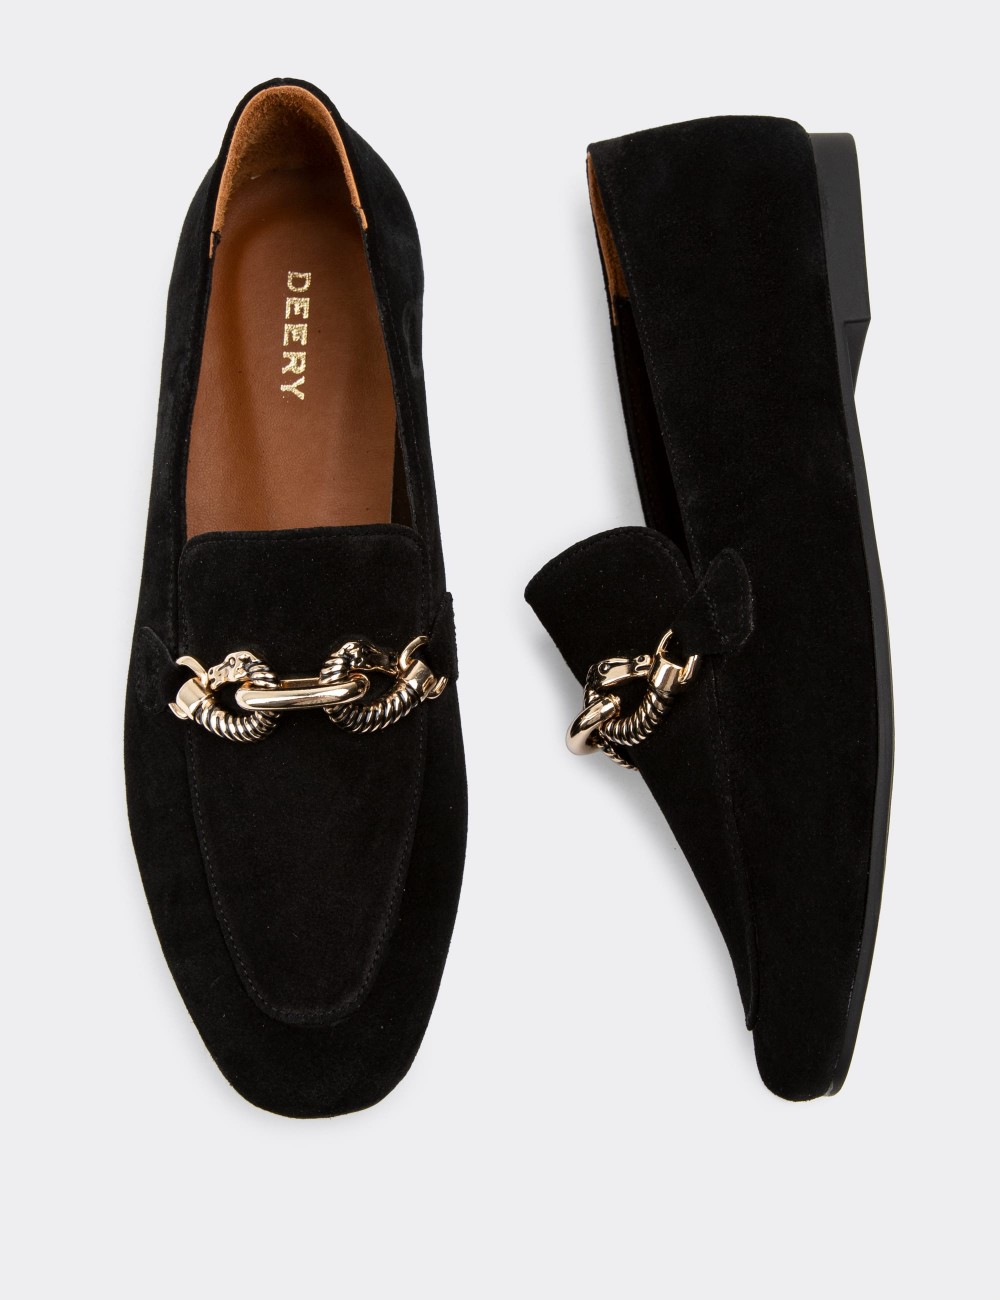 Black Suede Leather Loafers - 01912ZSYHC01